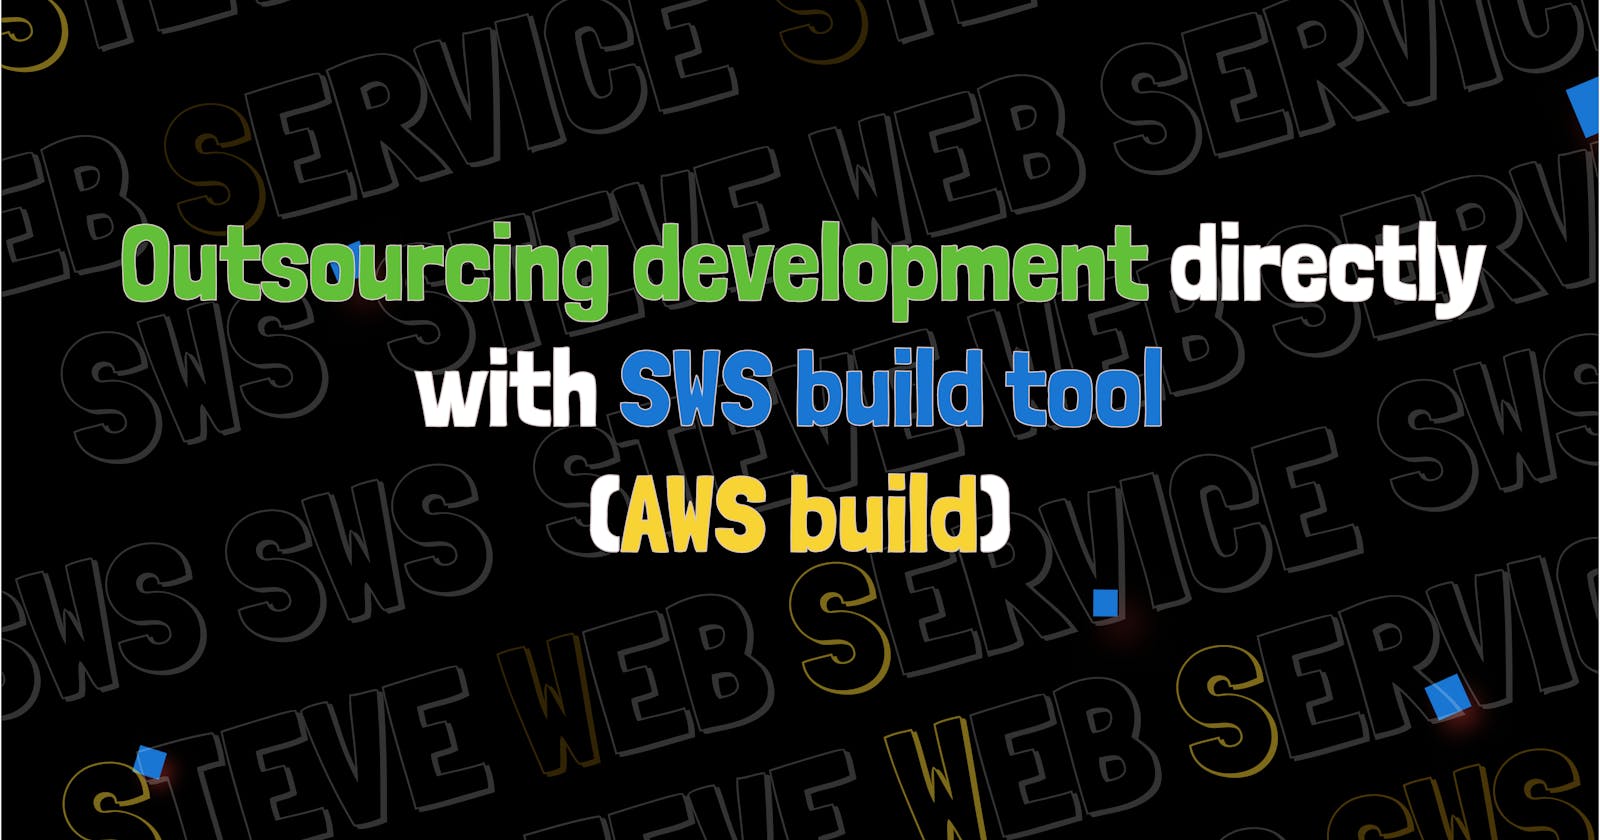 SWS Console: Outsourcing development directly with SWS build tool (AWS build).